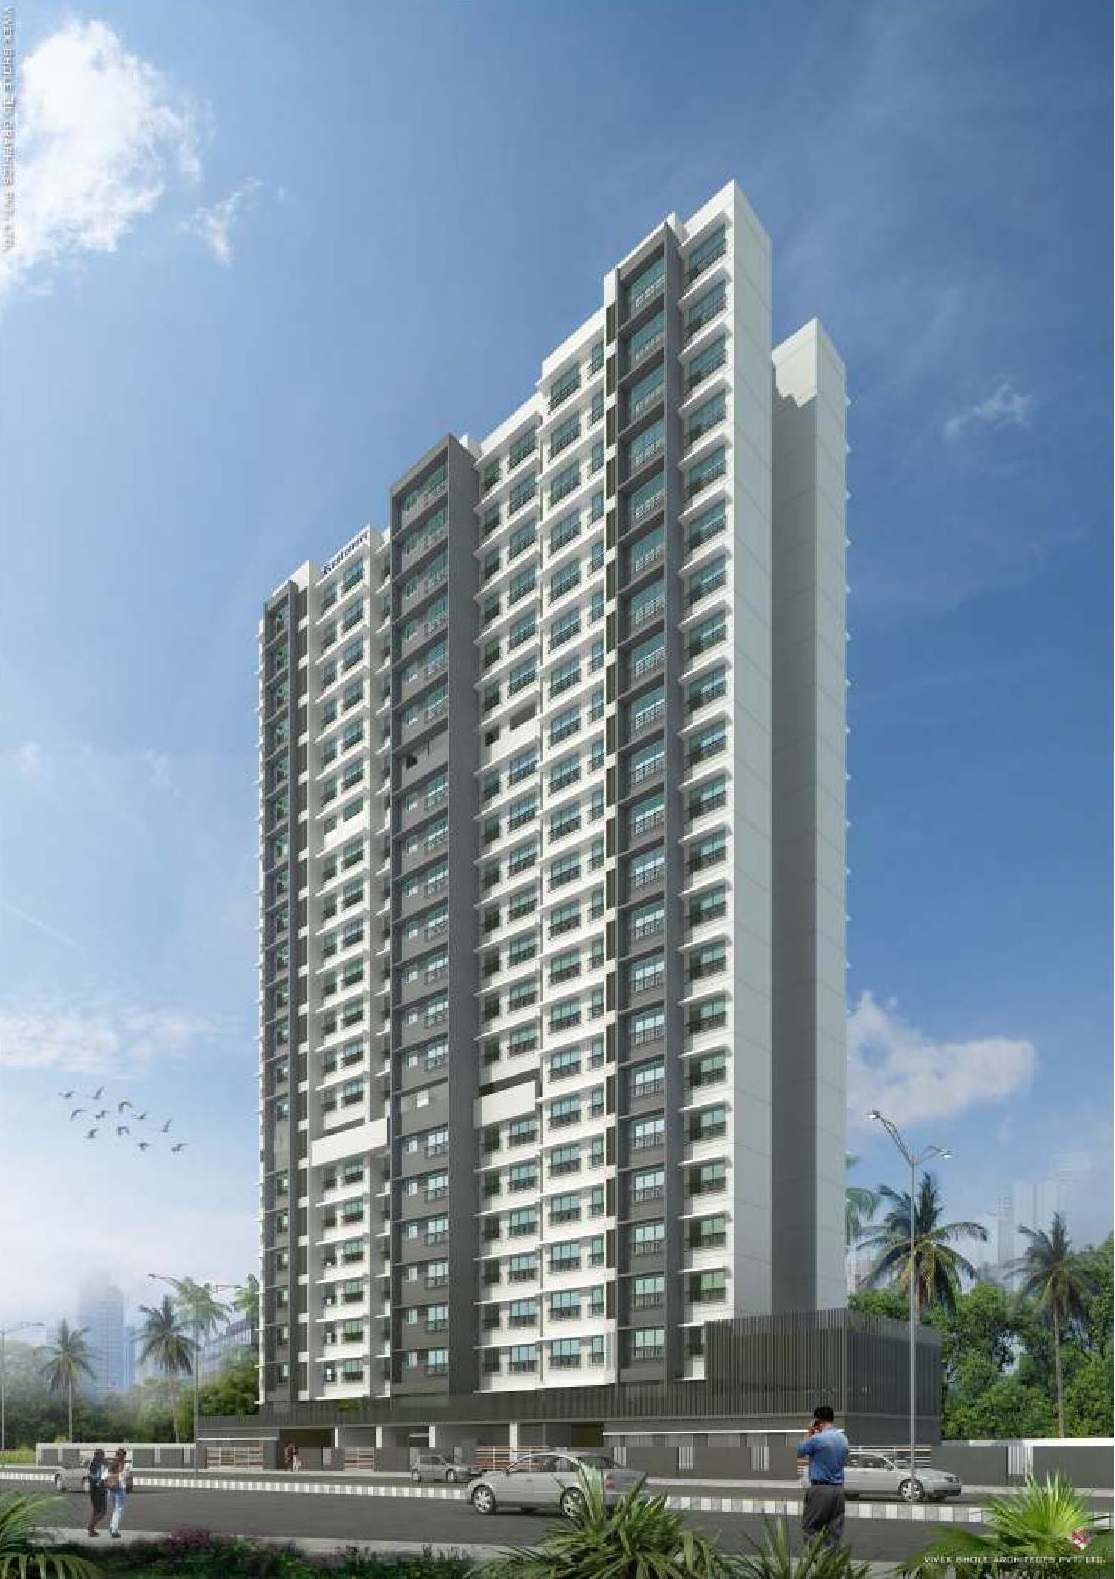 Live in home with concept of personal space at Rustomjee Pinnacle in Mumbai Update